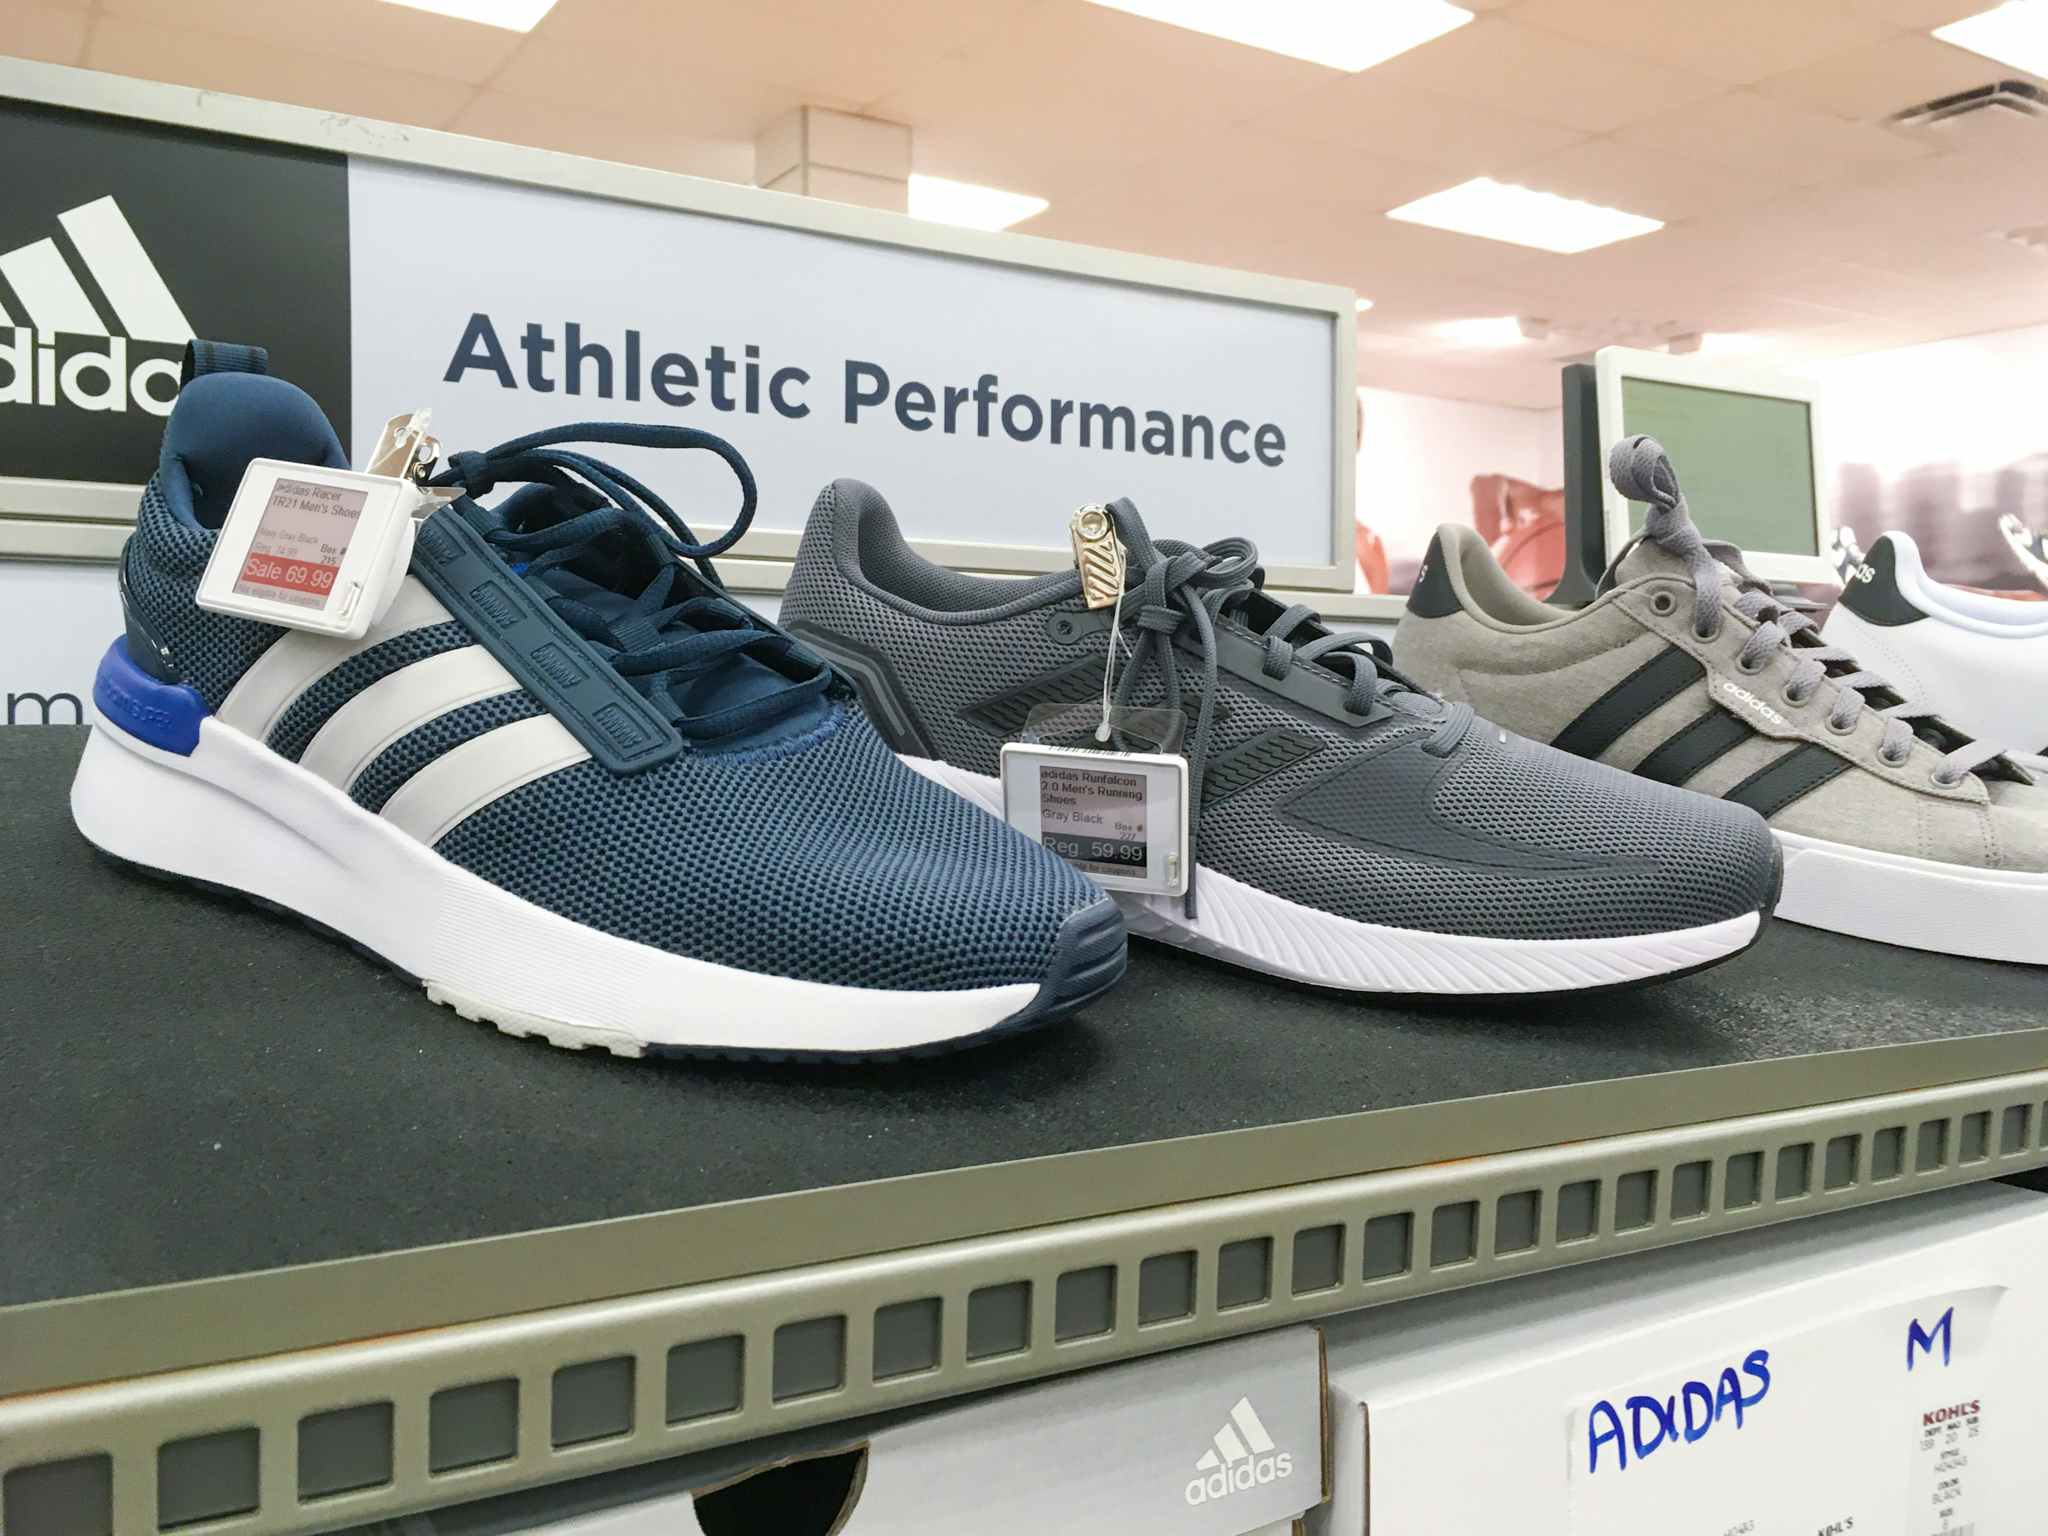 Adidas sneakers on display in the shoe section of Kohl's